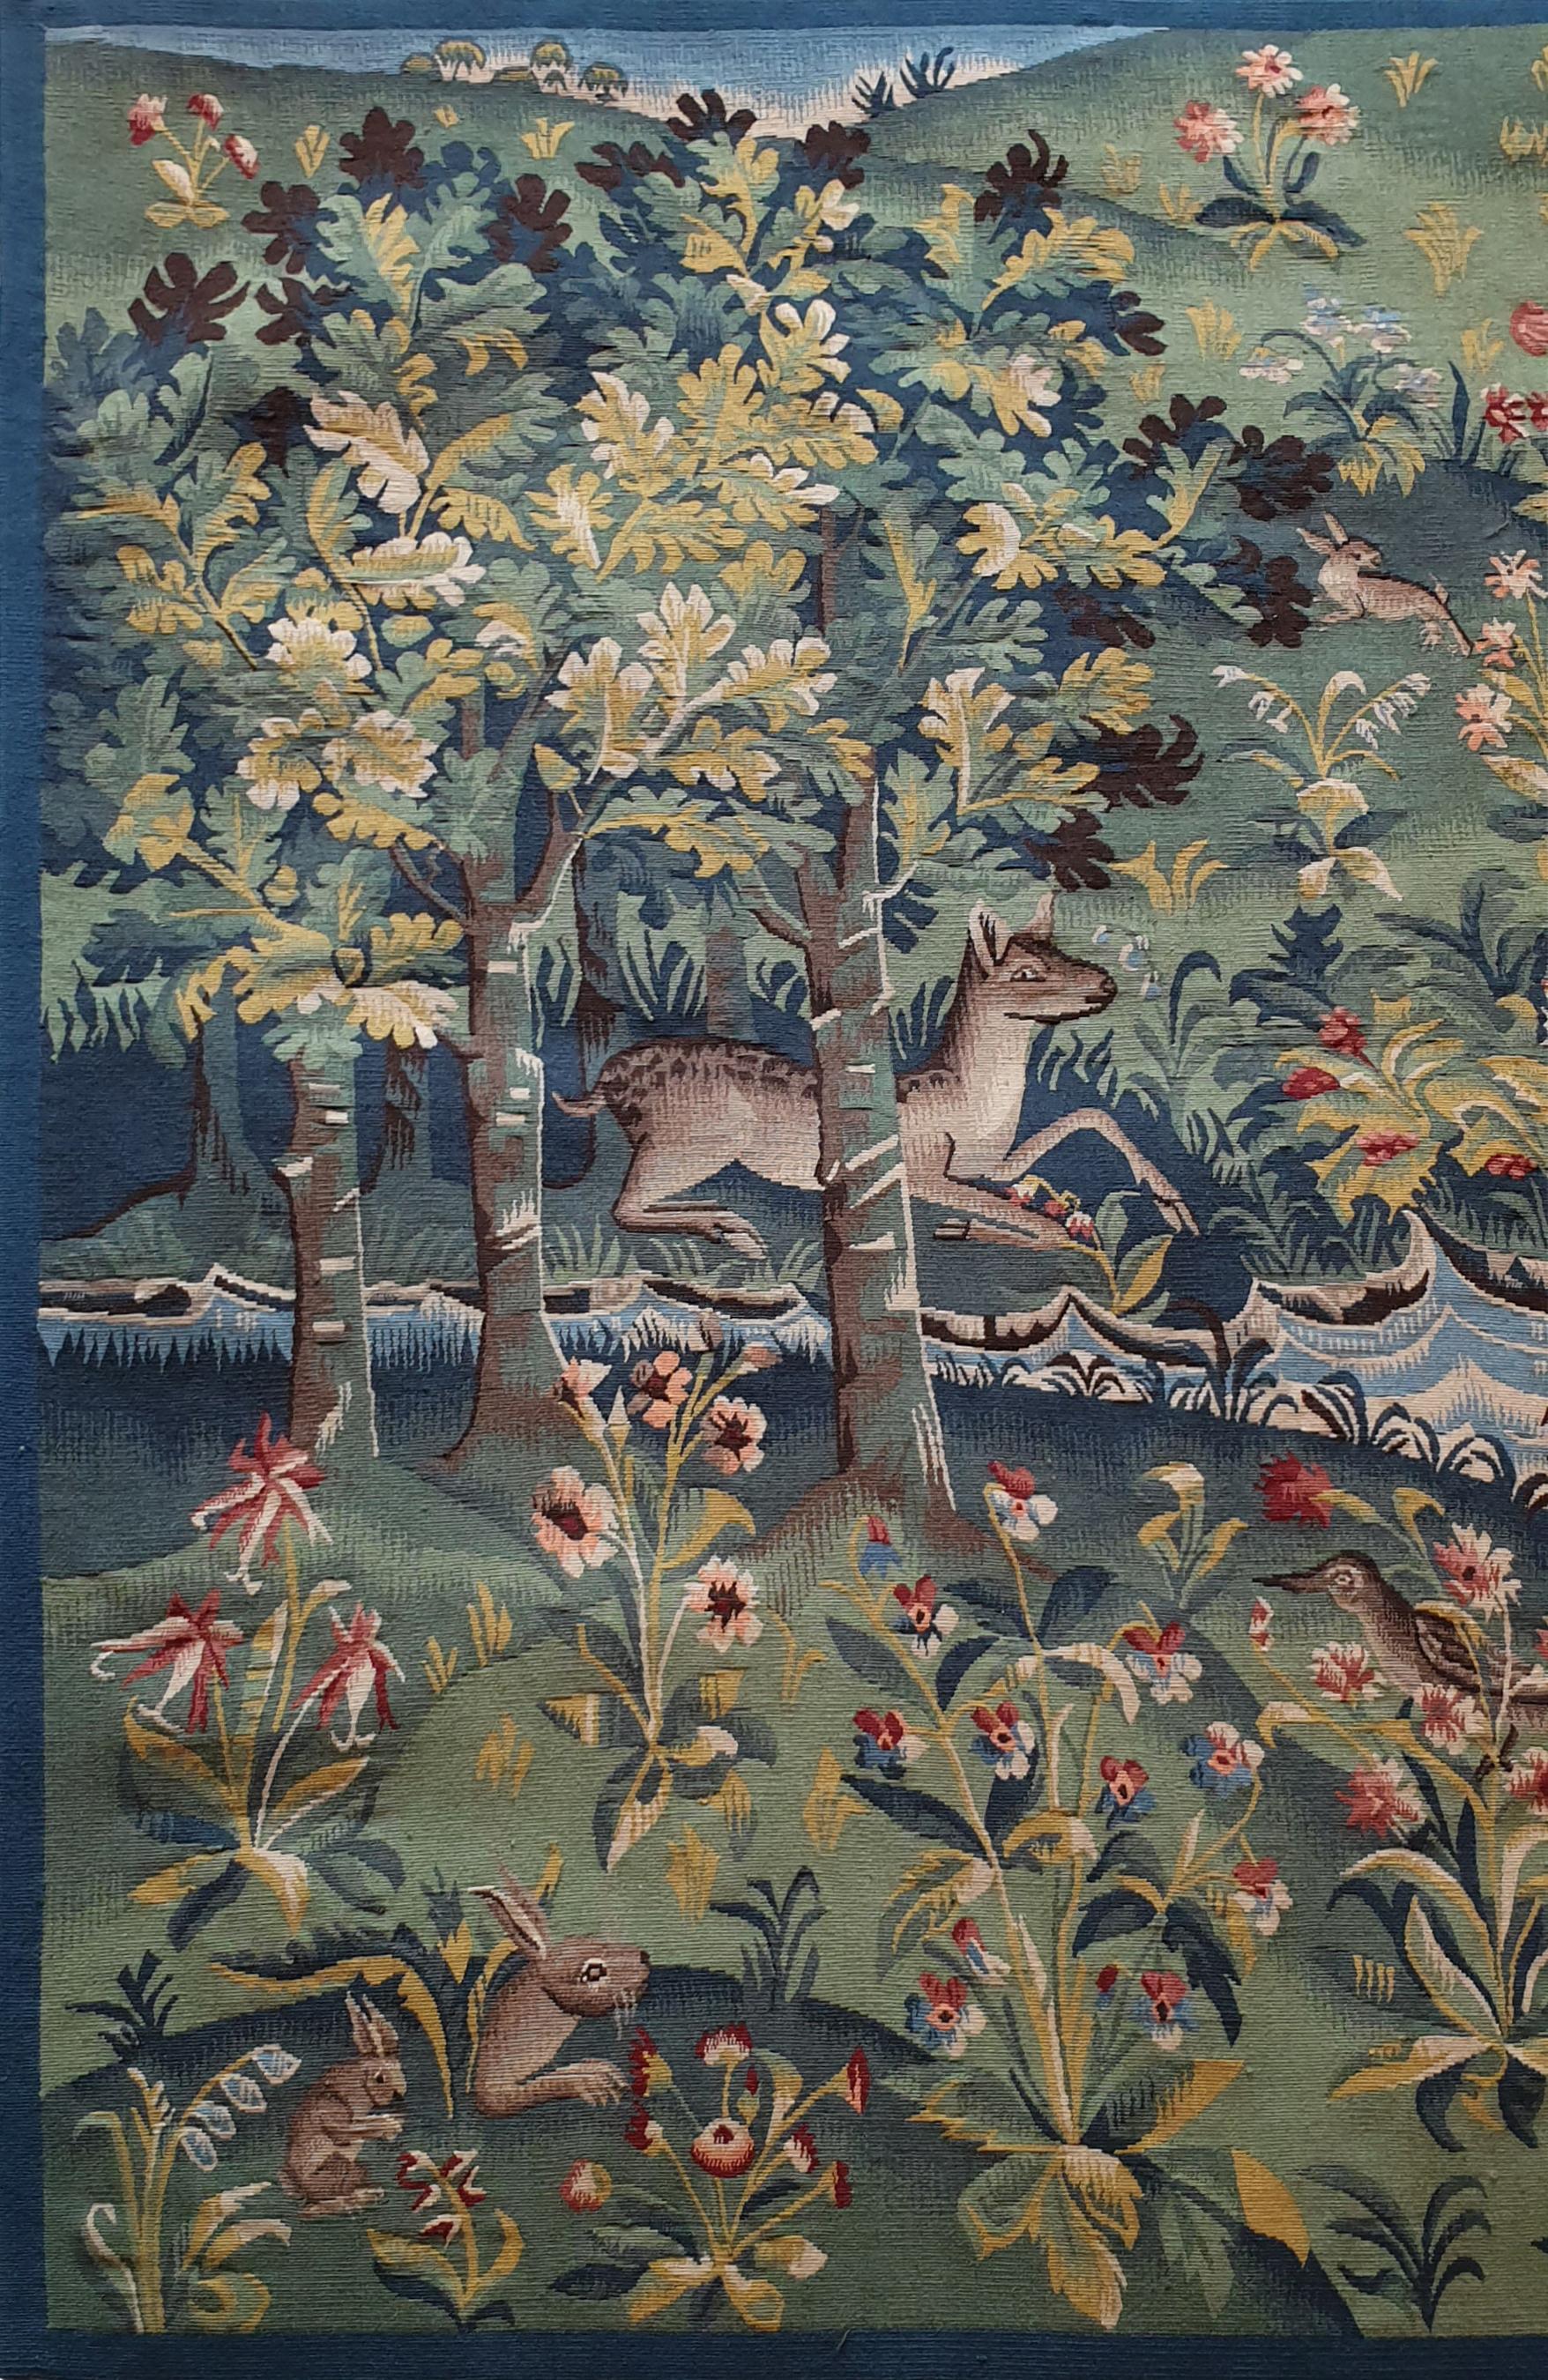  Thousand Flowers Mediaeval Tapestry Made in the 19th Century - N° 765 2